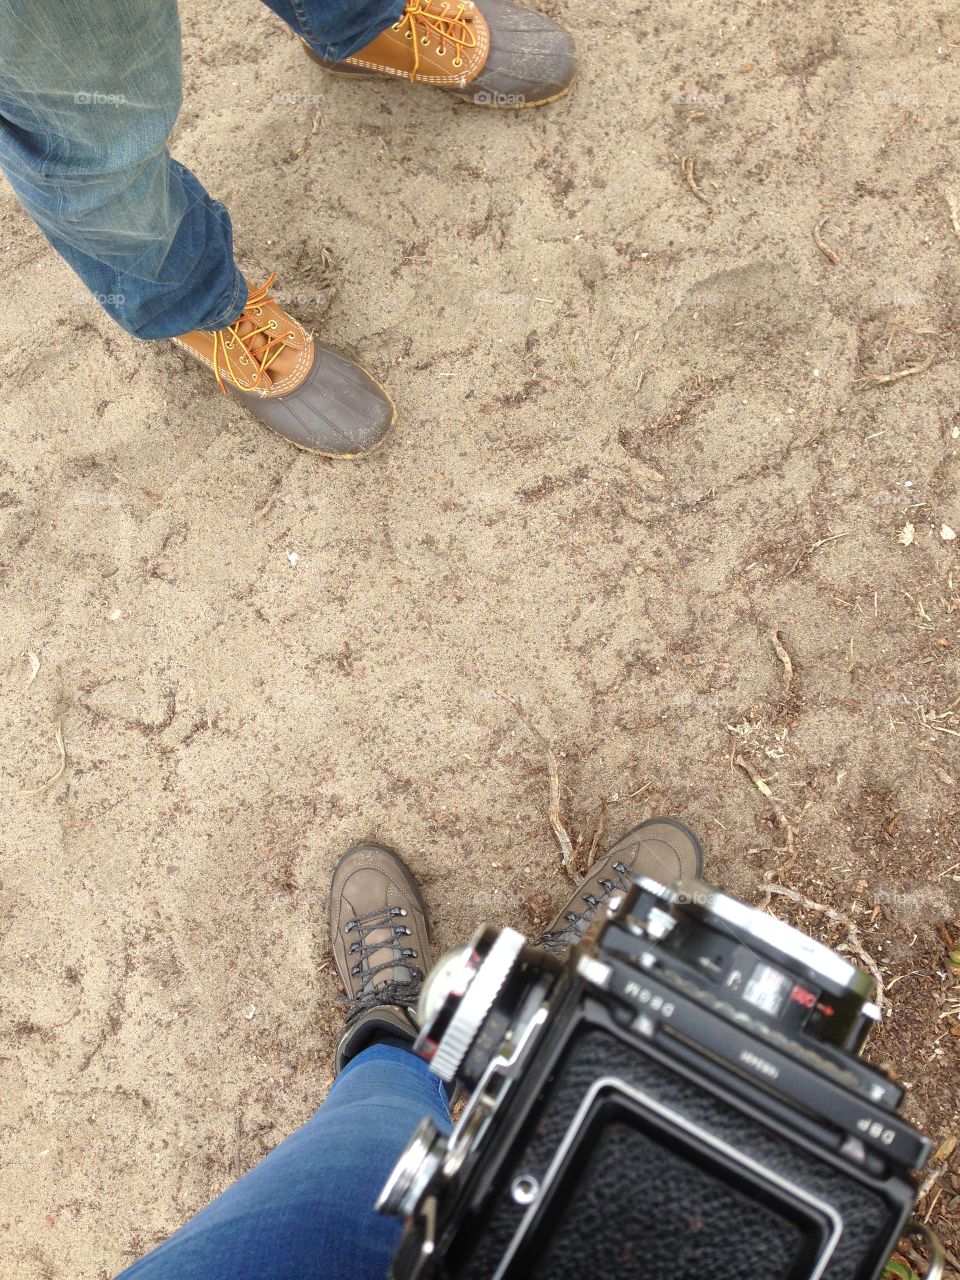 Two peoples feet in sand with vintage camera 